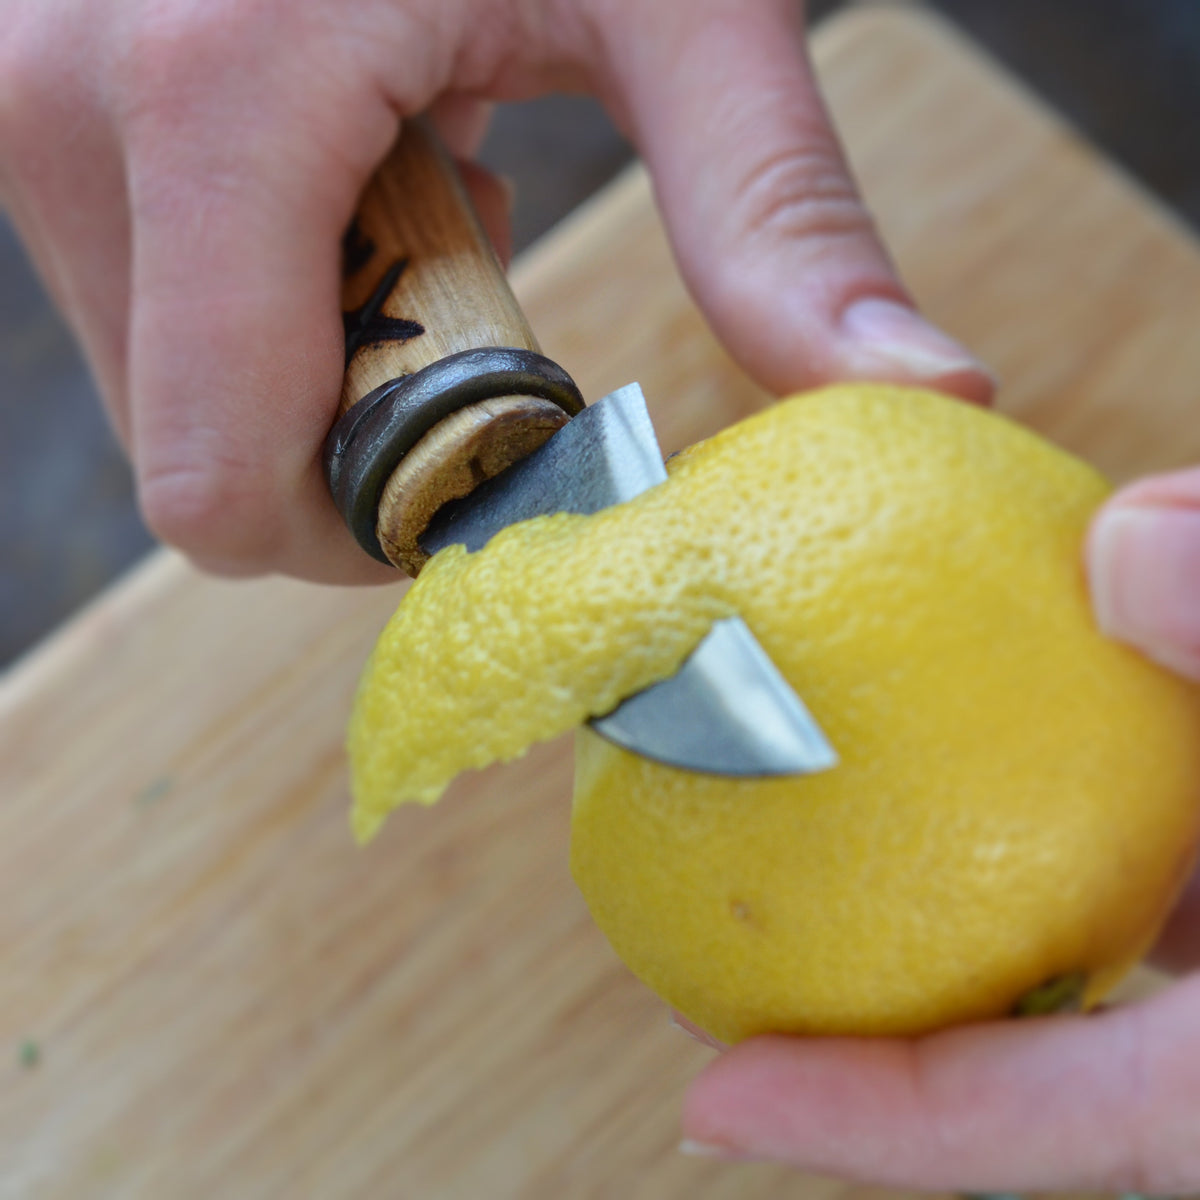 Master Shin's Anvil, #58 rustic Paring Knife, small with concave blade - lifestyle photo of knife peeling lemon 